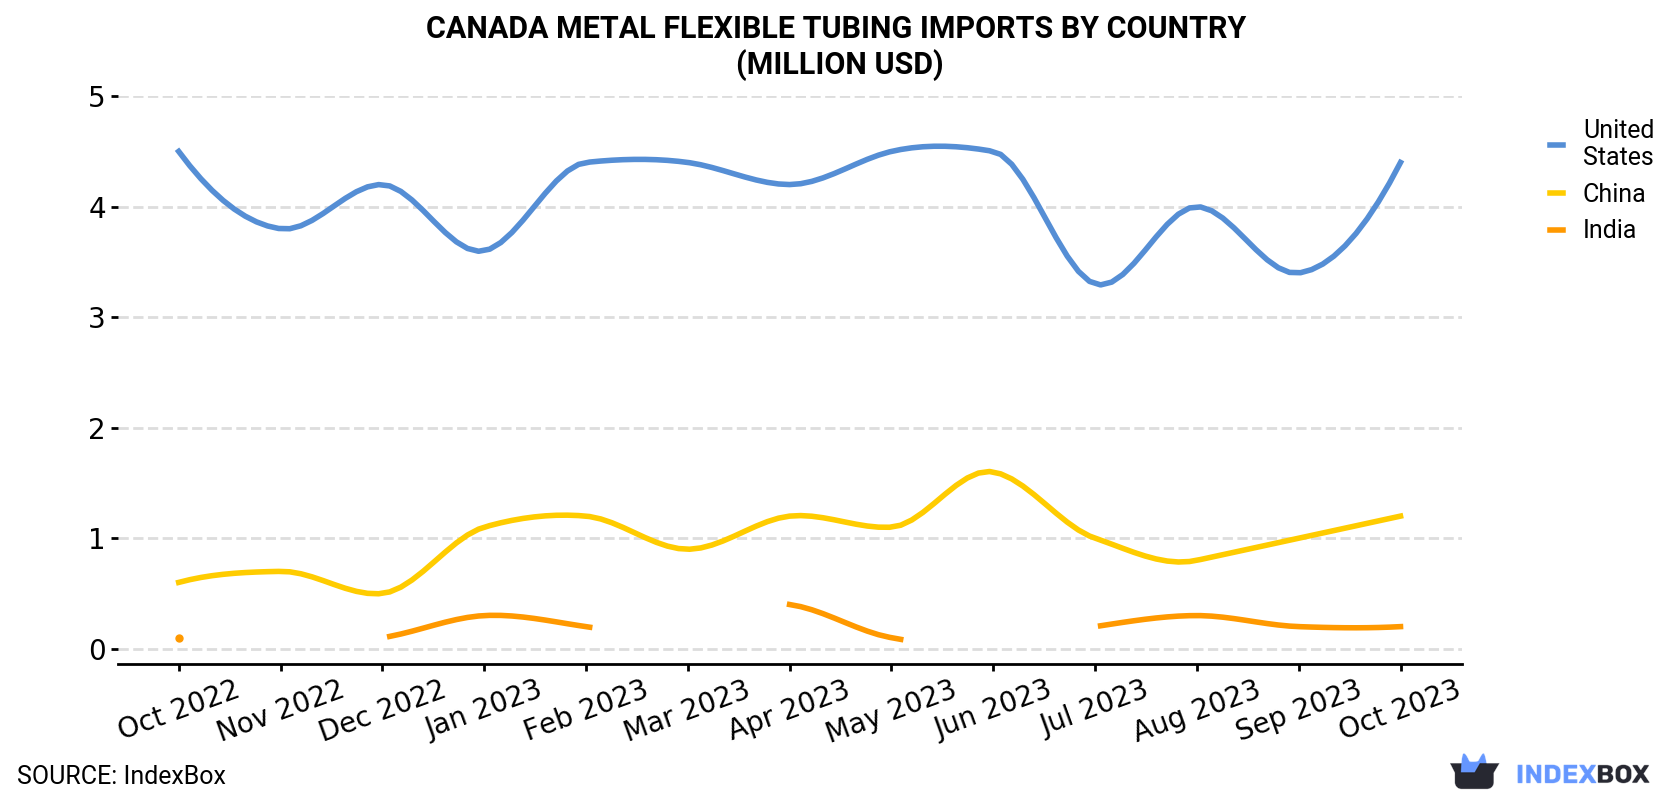 Canada Metal Flexible Tubing Imports By Country (Million USD)